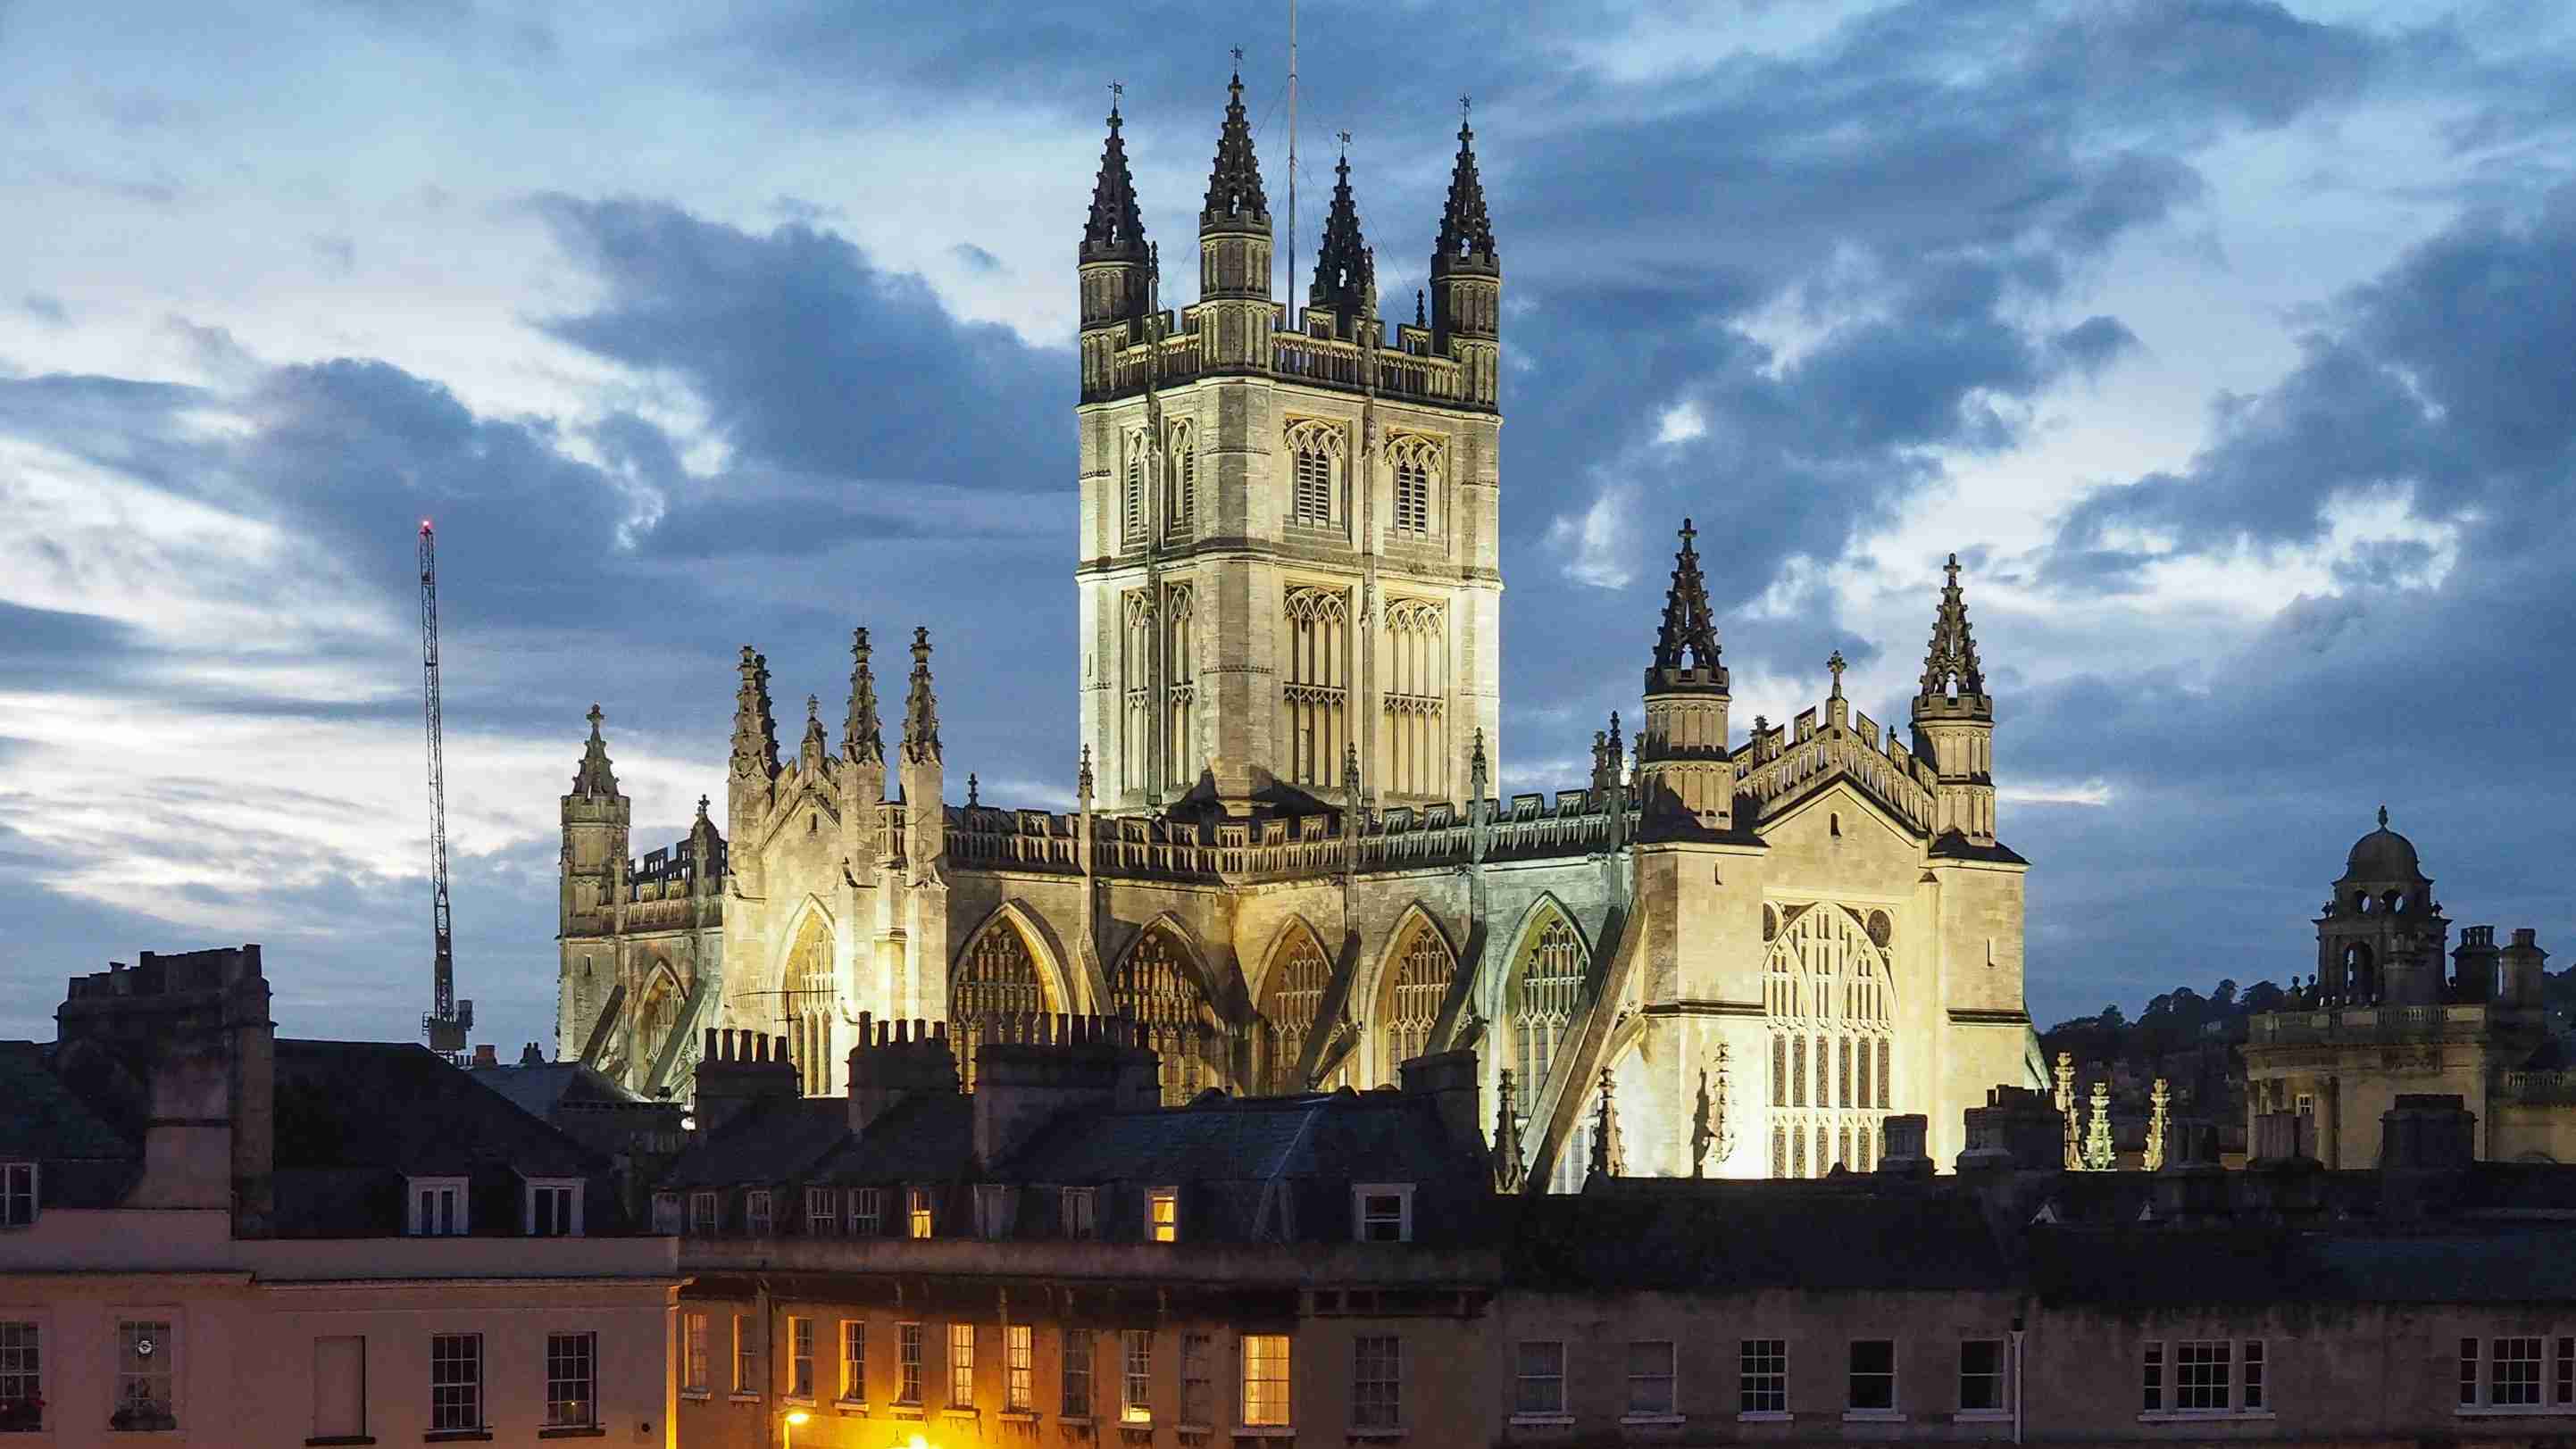 Bath Abbey in twilight across the roofs of houses